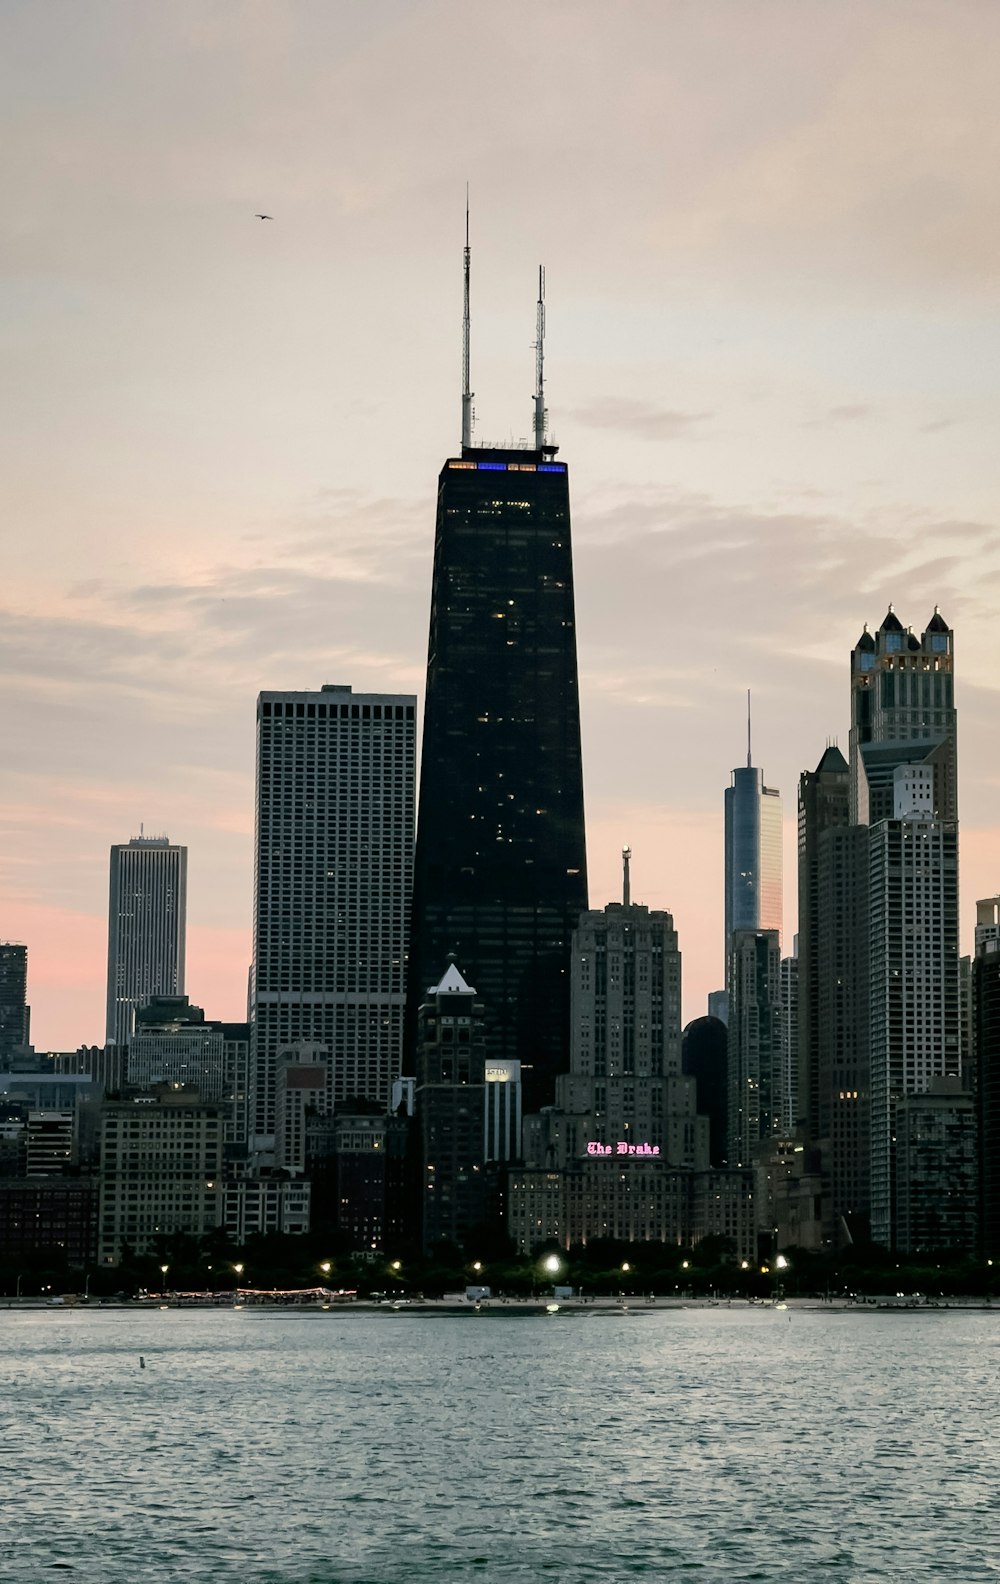 John Hancock Center skyline with a body of water in the foreground photo –  Free Chicago Image on Unsplash